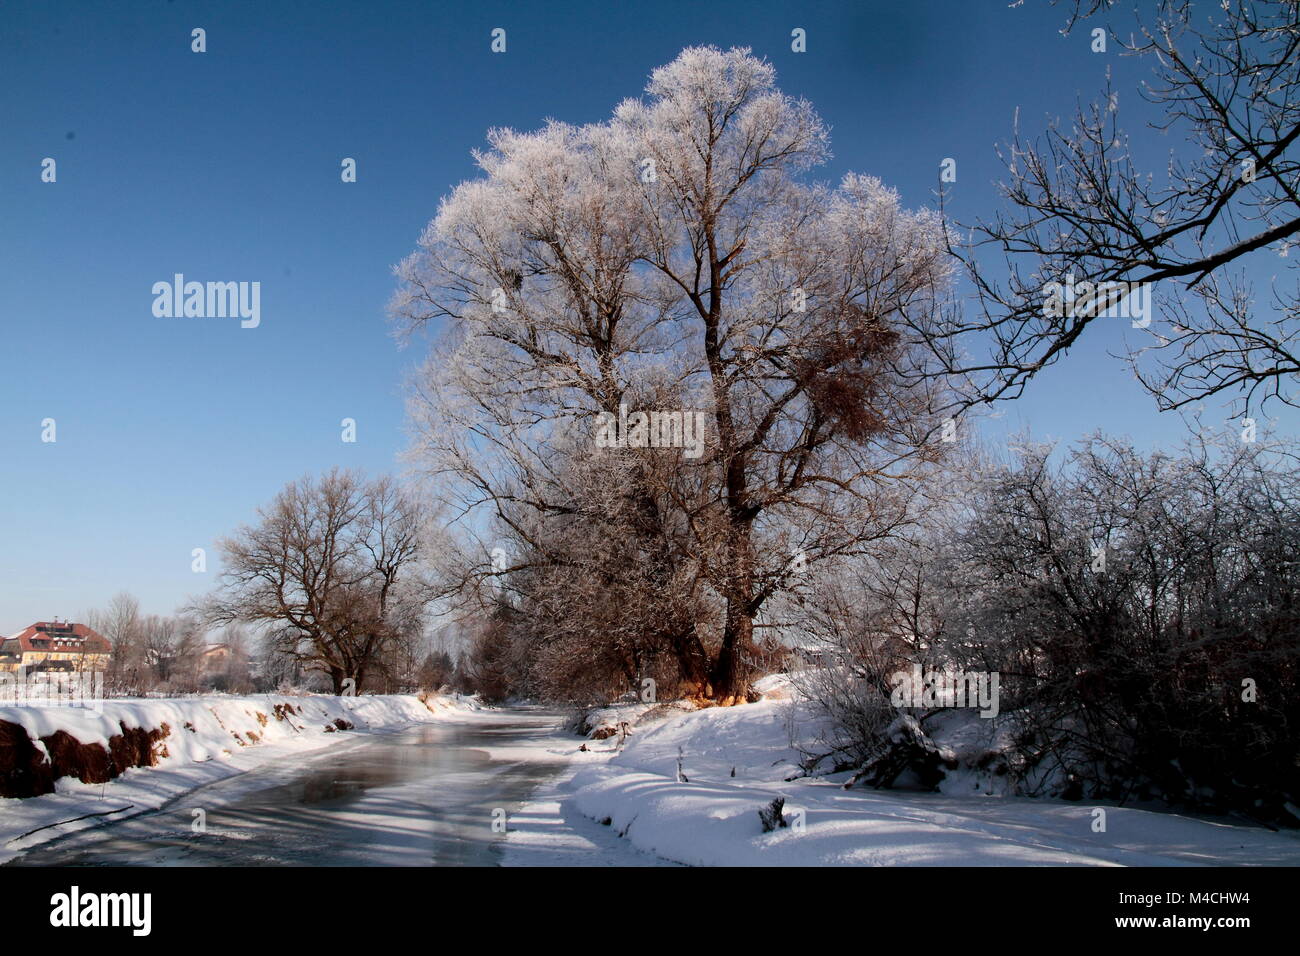 old willow tree with frosty rime Stock Photo